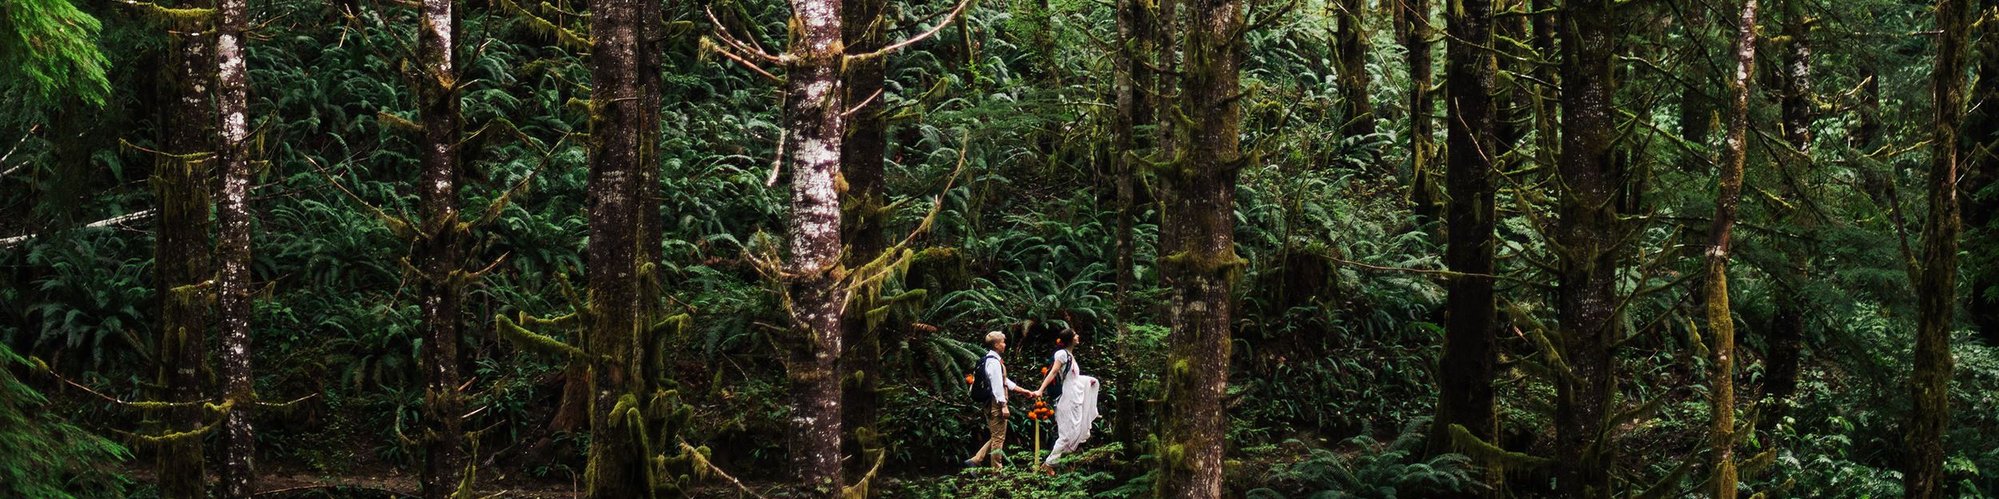 An eloping couple walks through a lush and fern-filled forest